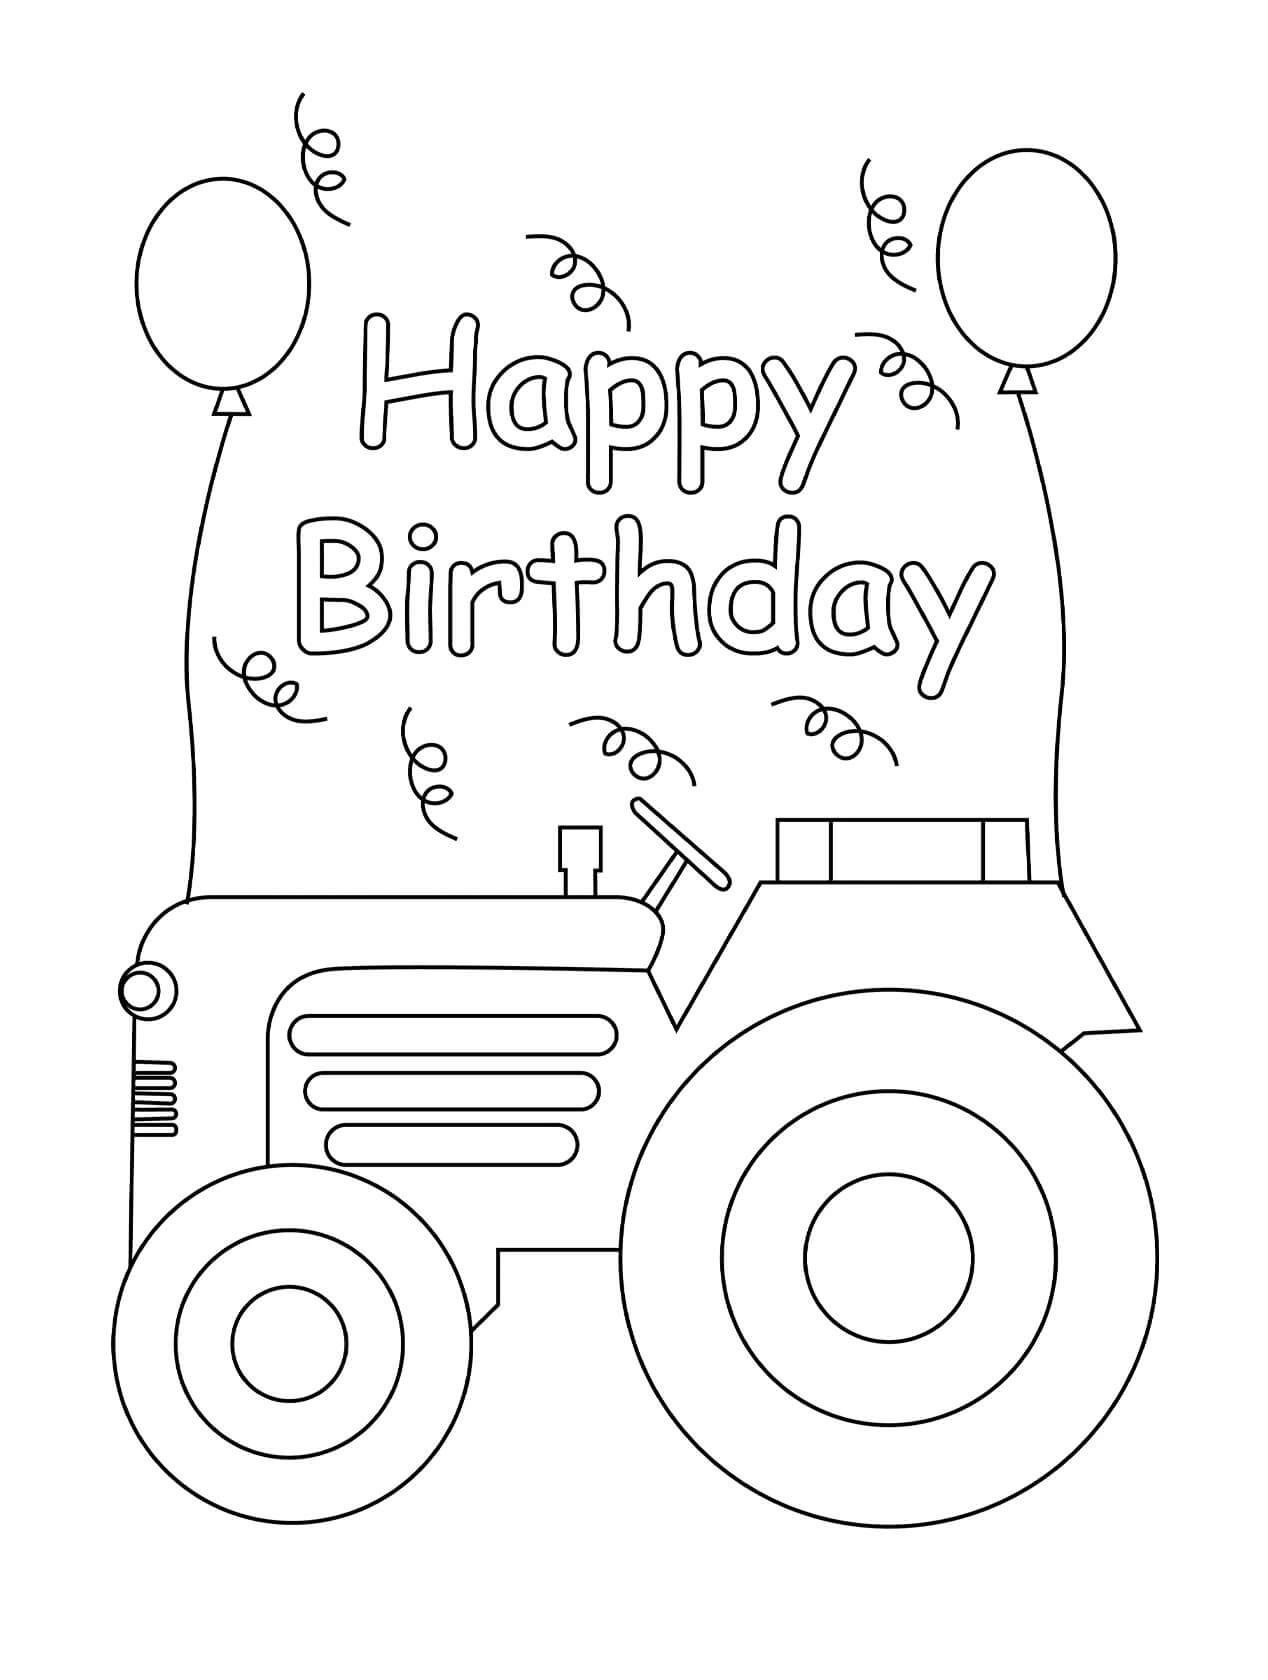 Tractor in Happy Birthday